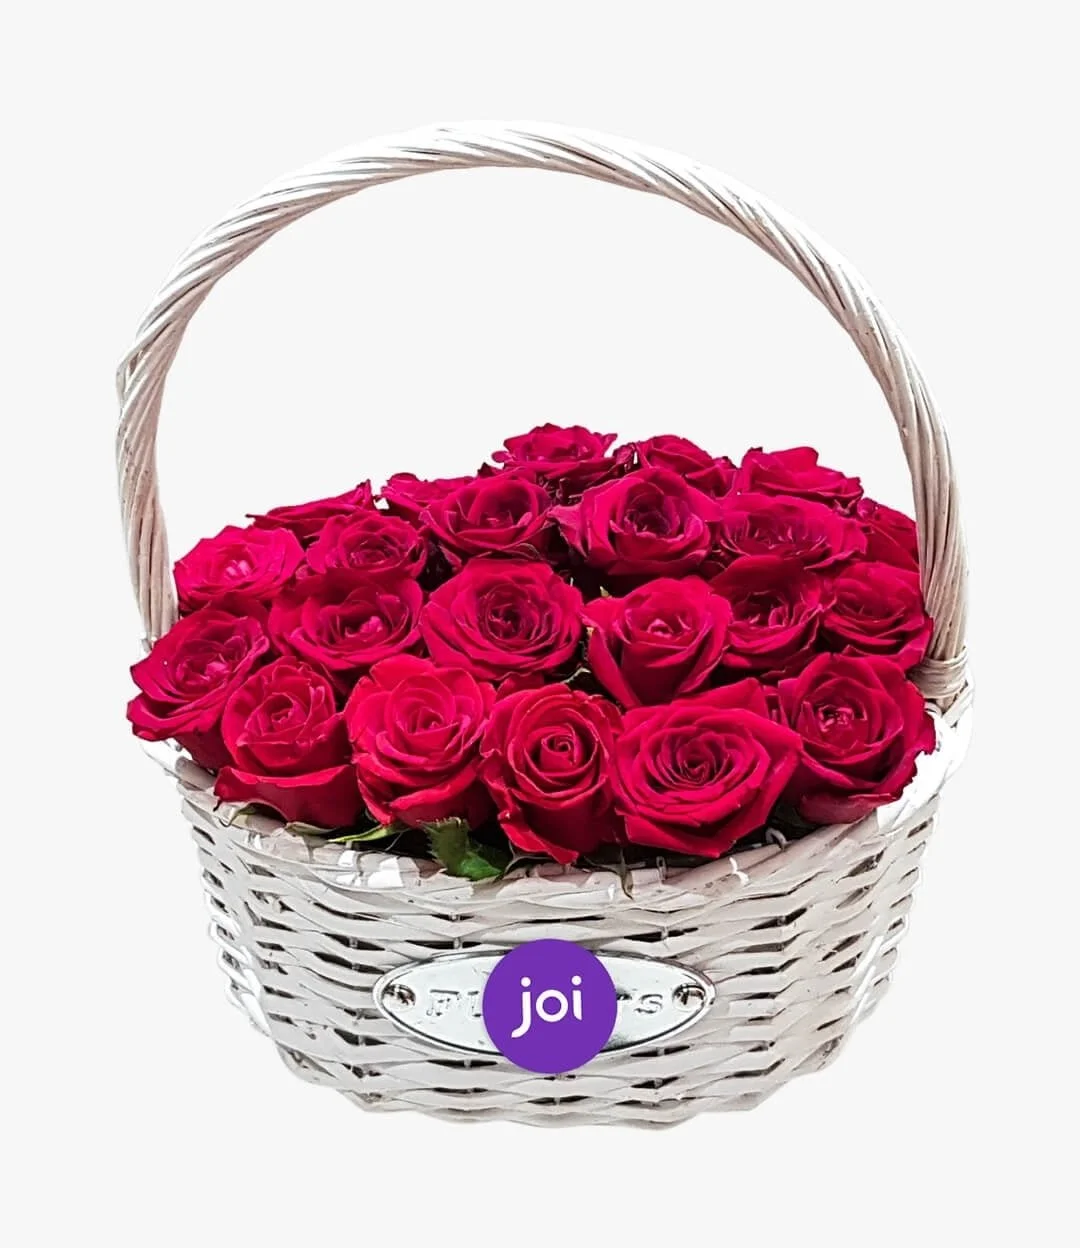 A Basket of Roses 